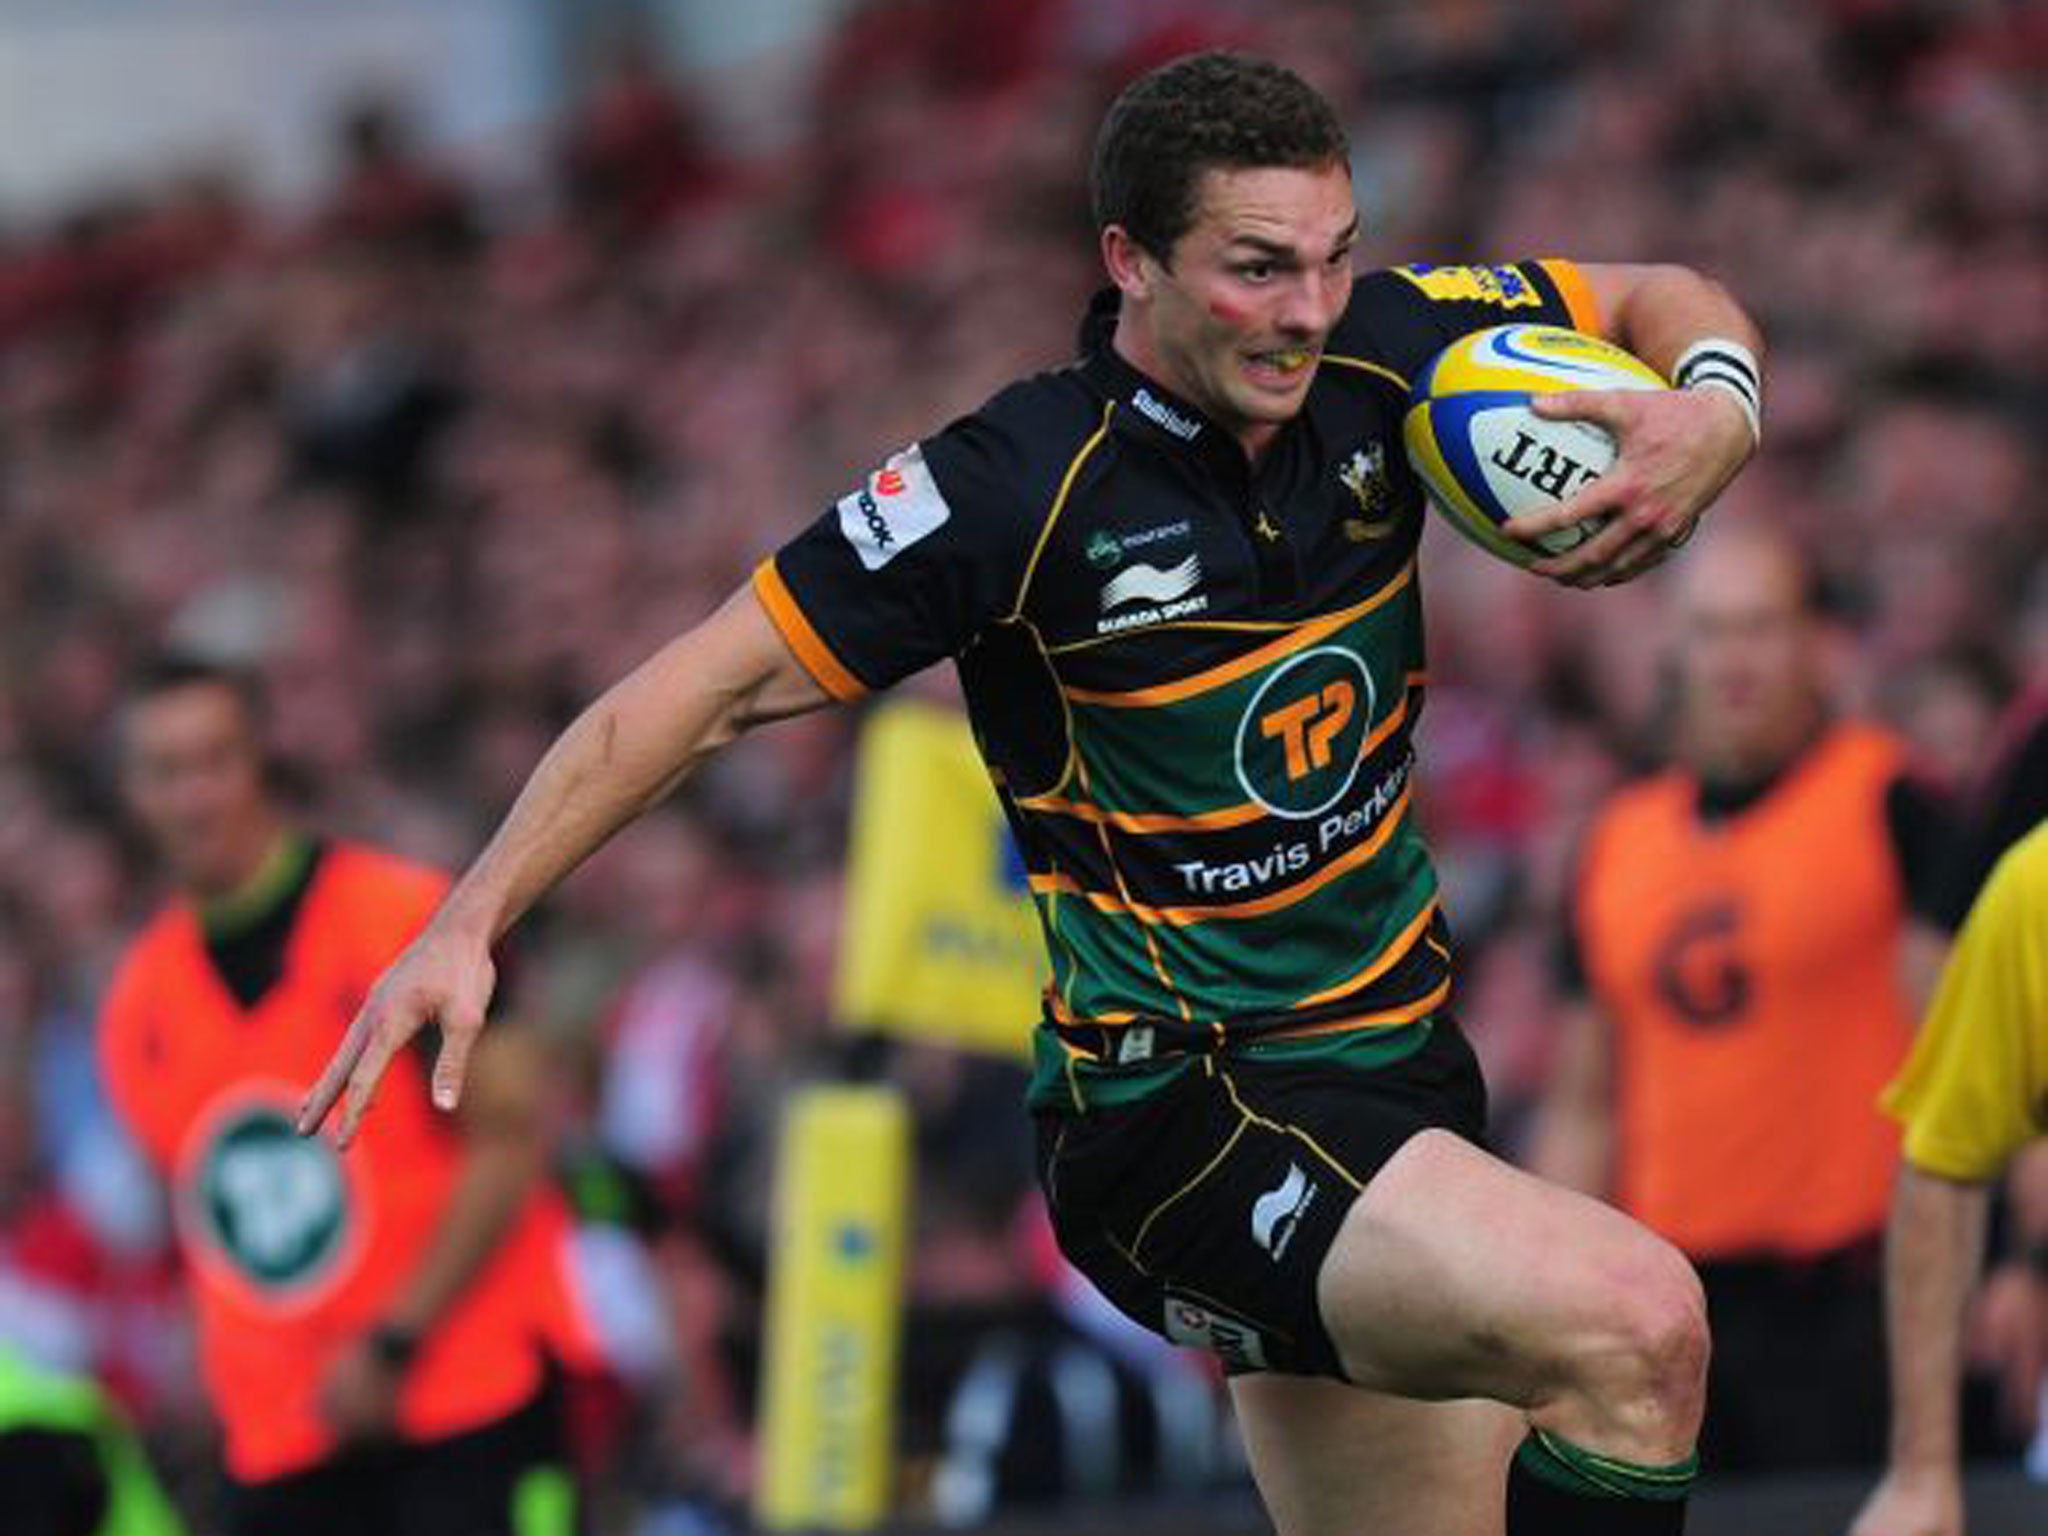 Northampton are set to field George North against Sale